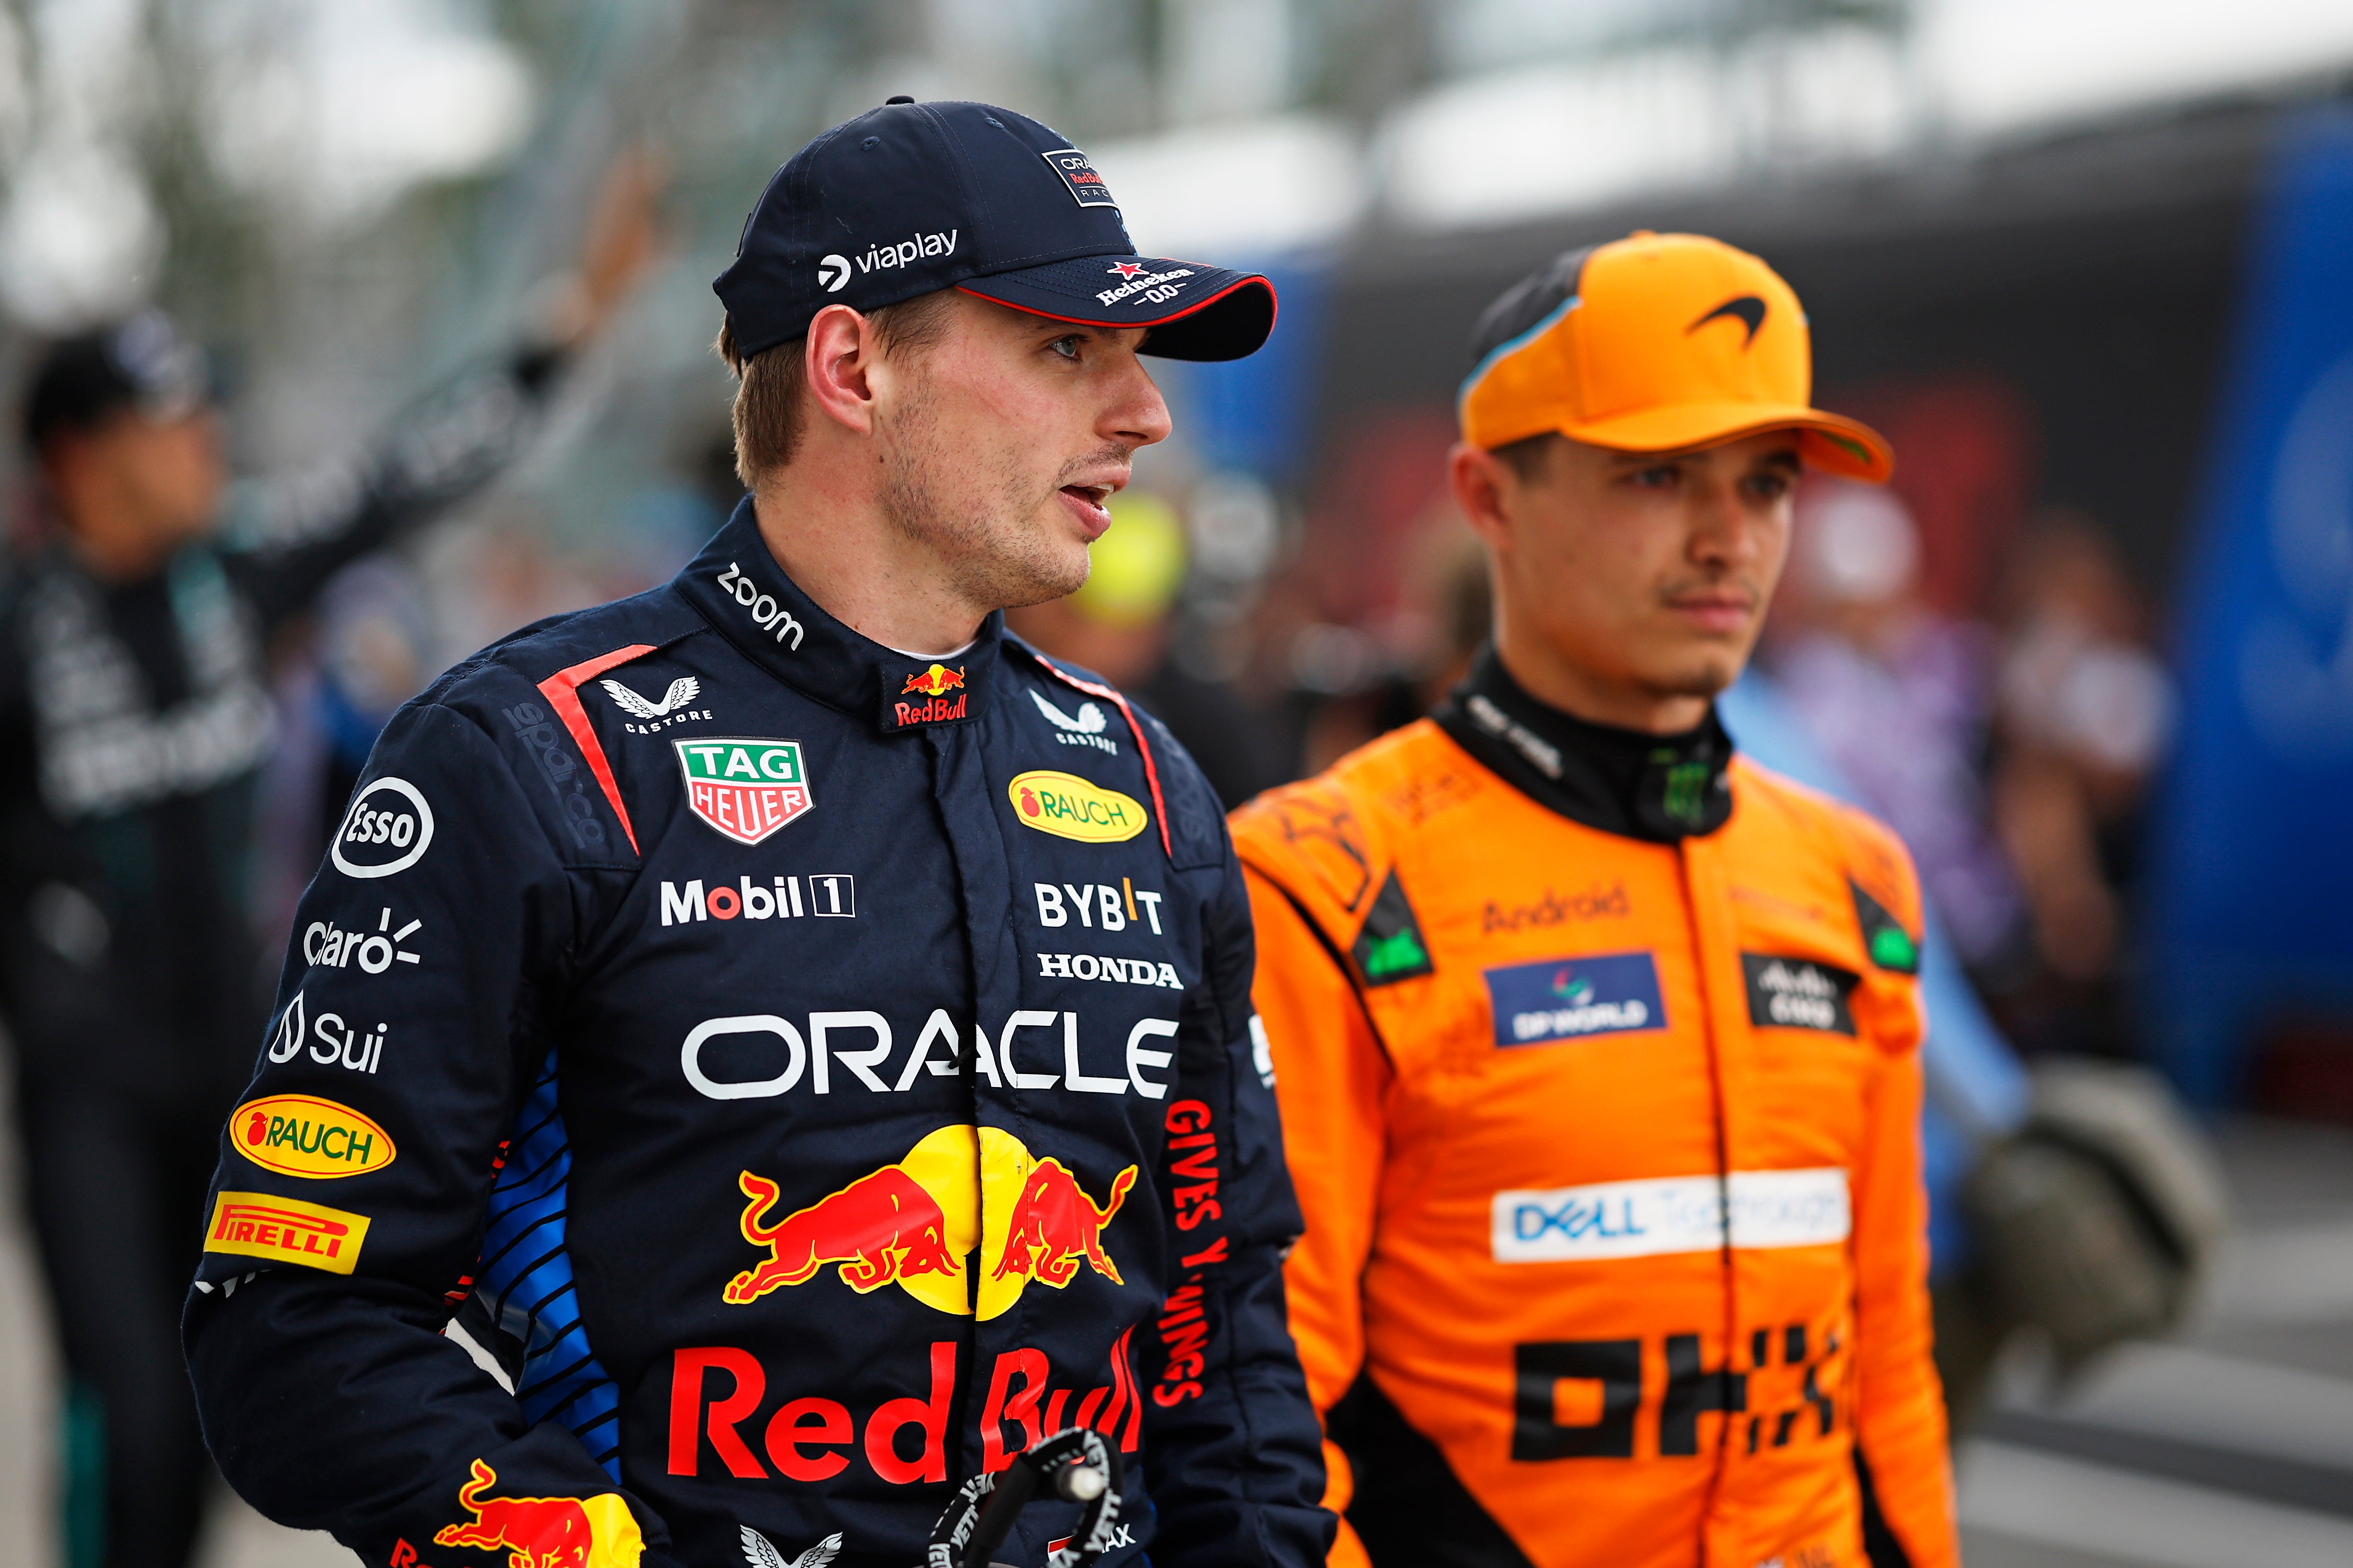 max verstappen, lando norris, austrian grand prix, george russell, after austria clash, is this the end of max verstappen and lando norris’s bromance?